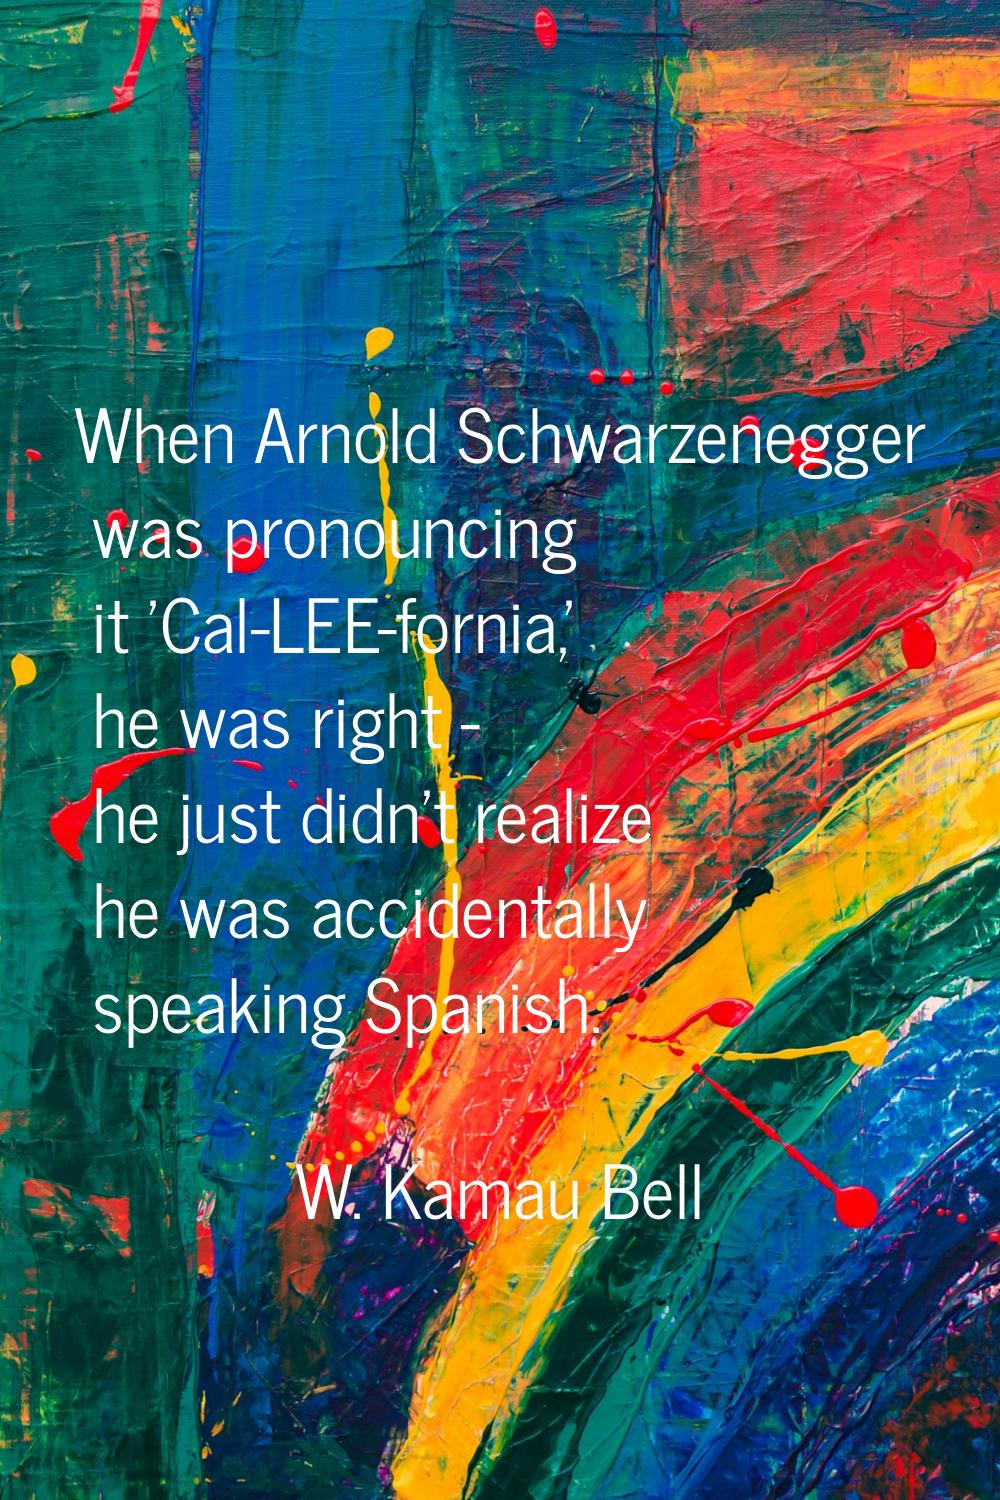 When Arnold Schwarzenegger was pronouncing it 'Cal-LEE-fornia,' he was right - he just didn't reali